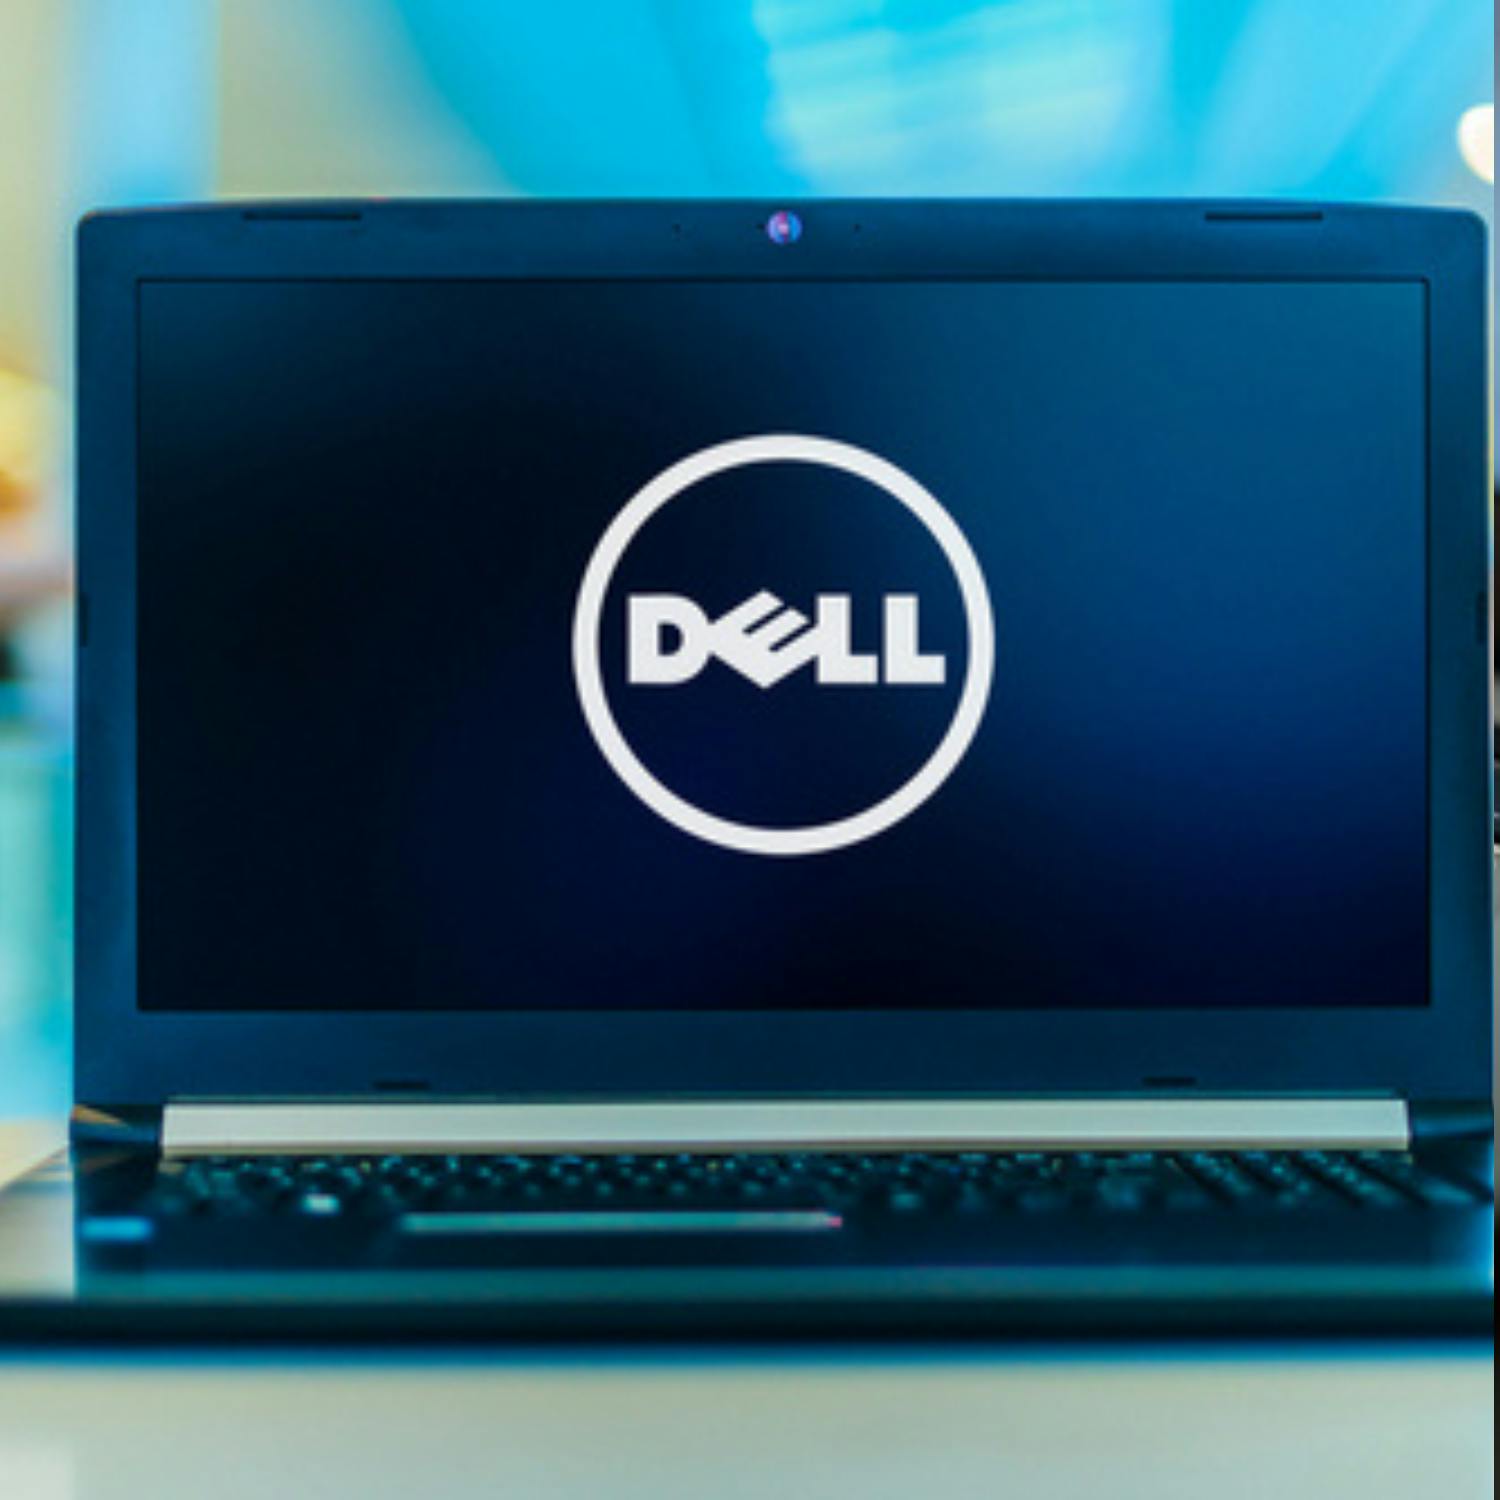 Dell Technologies on AI and the sweeping changes it will bring